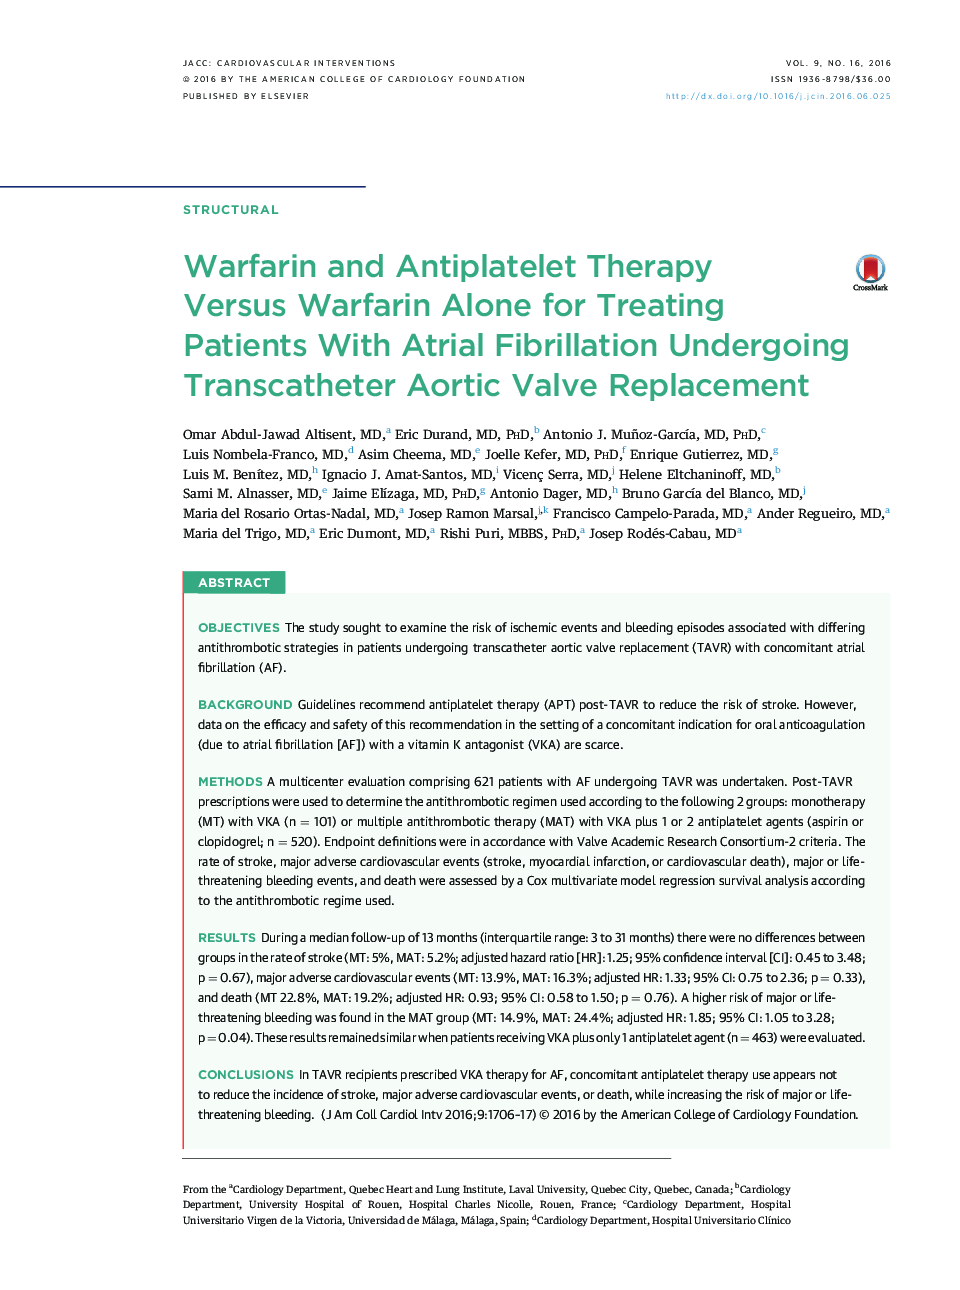 Warfarin and Antiplatelet Therapy VersusÂ Warfarin Alone for Treating PatientsÂ WithÂ Atrial Fibrillation Undergoing Transcatheter Aortic Valve Replacement